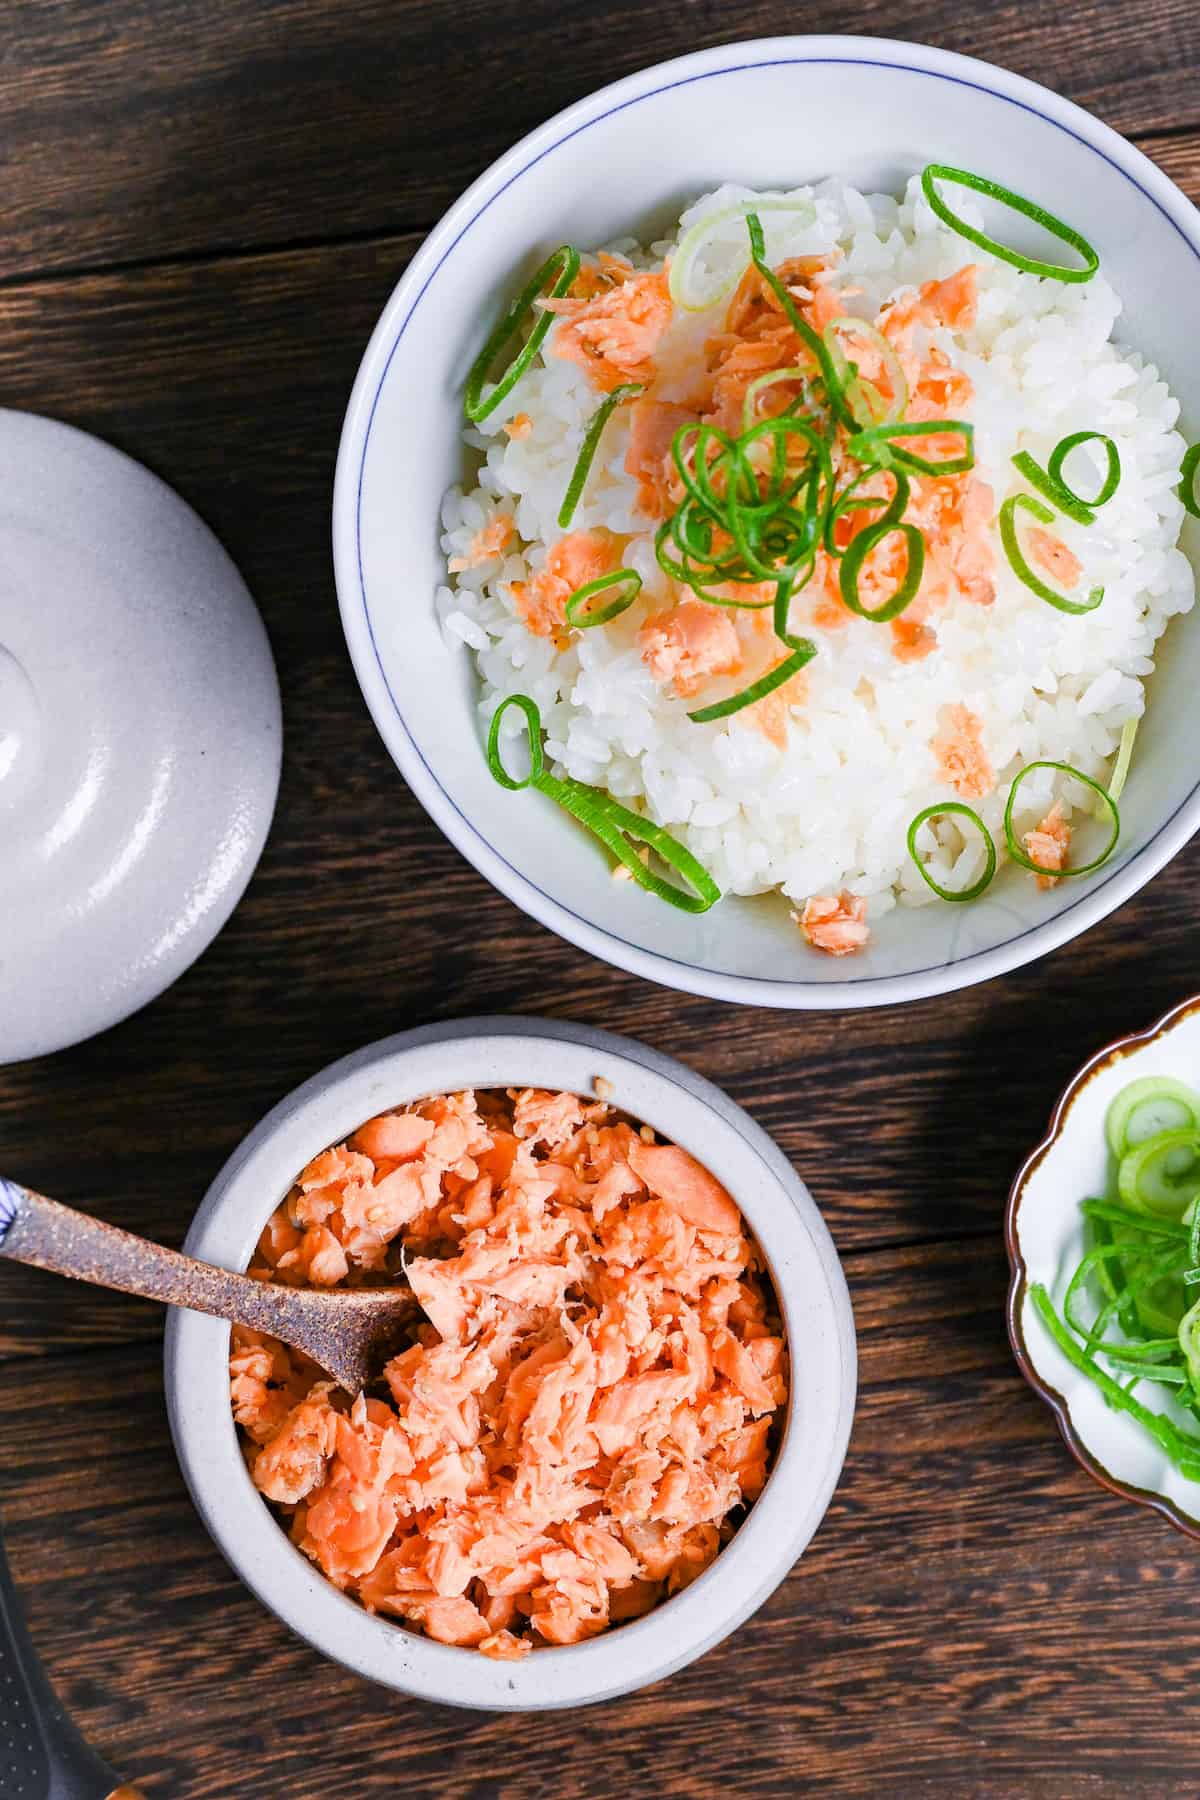 Homemade Japanese-style salmon flakes in a white ceramic pot with brown decorative spoon next to a bowl of rice and small dish of green onions